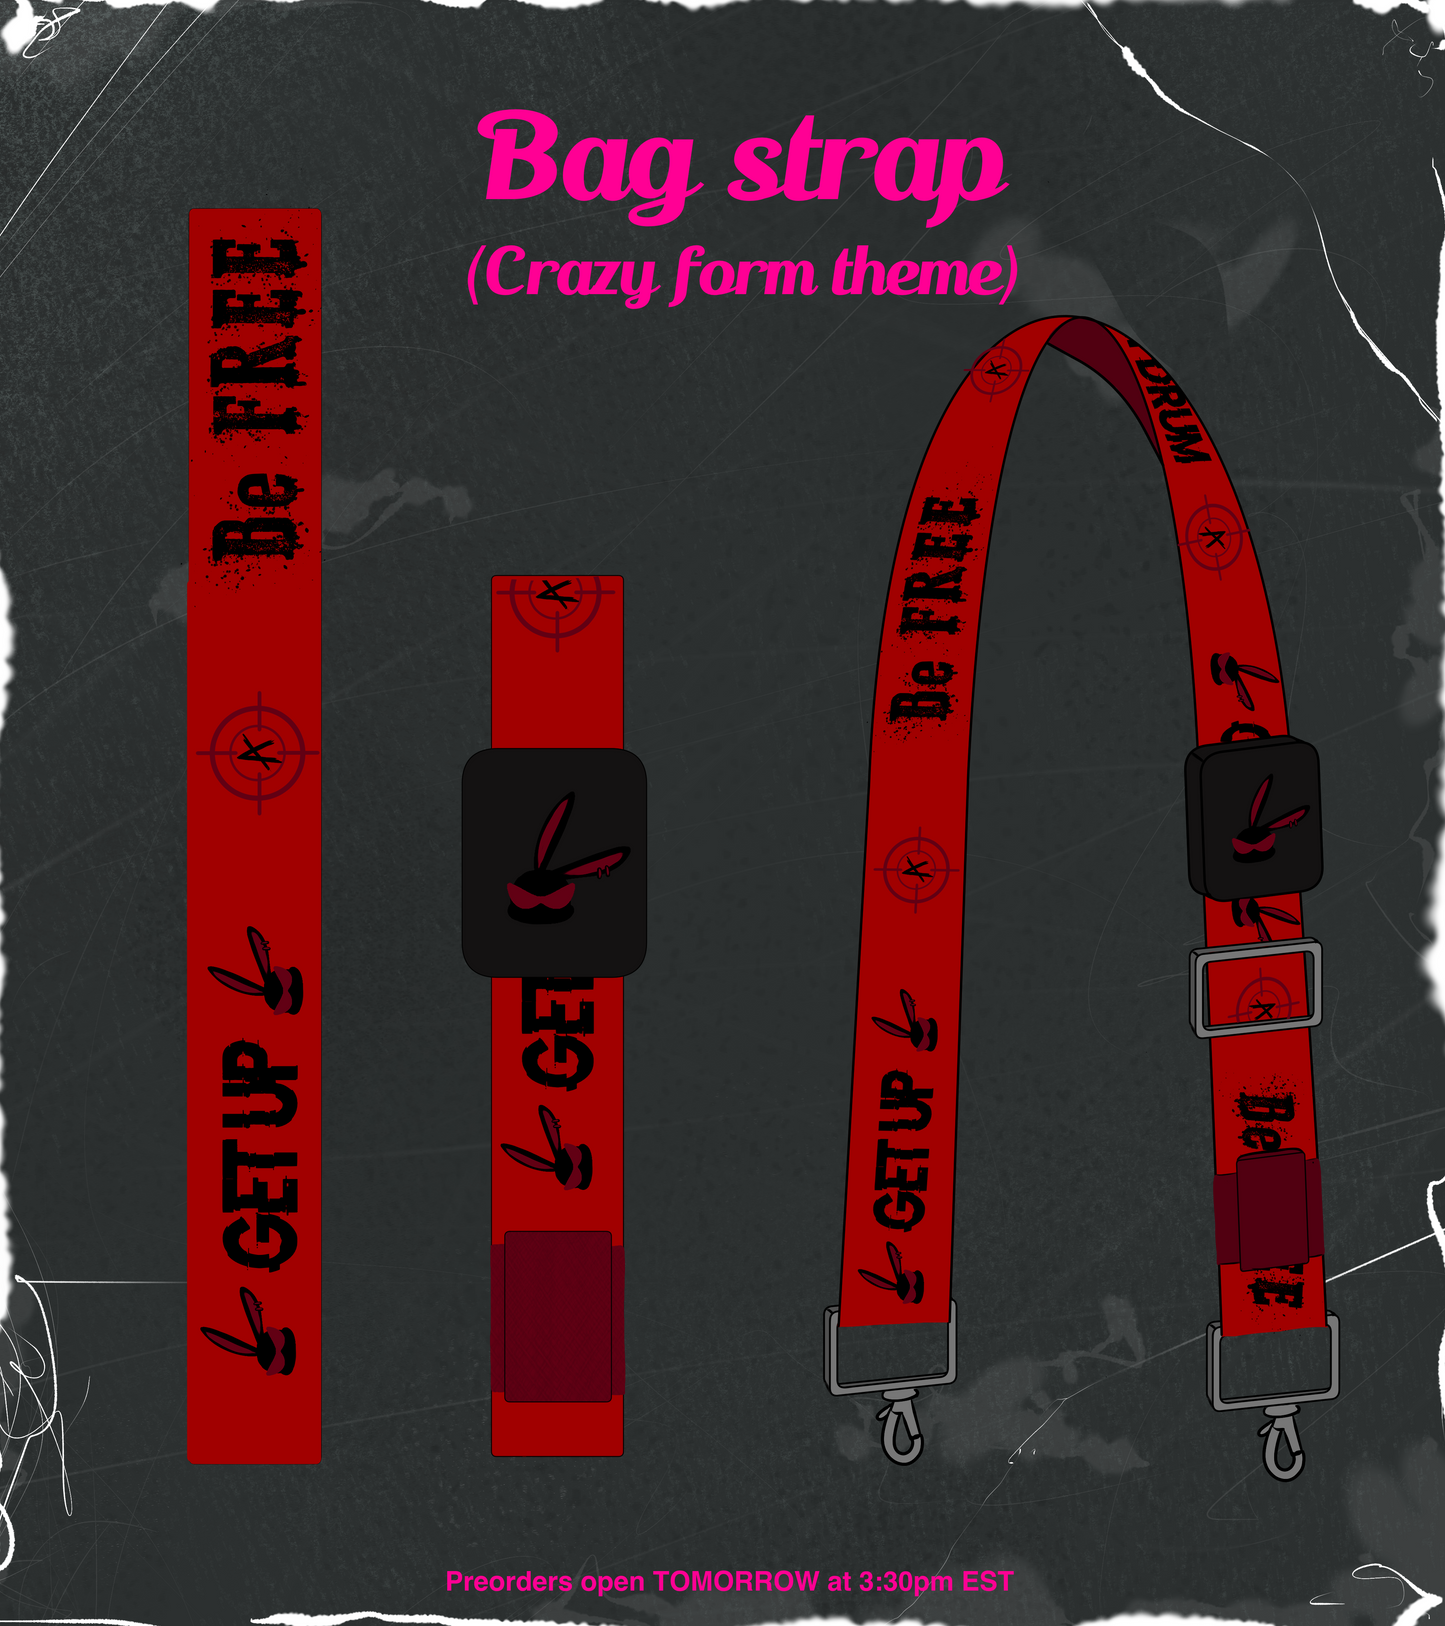 Express your ATINY spirit with our MITO-themed bag strap – a nod to ATEEZ’s crazy bunny! Elevate your bag game and show off your love for ATEEZ. Limited edition – grab yours now! 🐰 #MITOStrap #ATEEZMerch #ATINYFashion